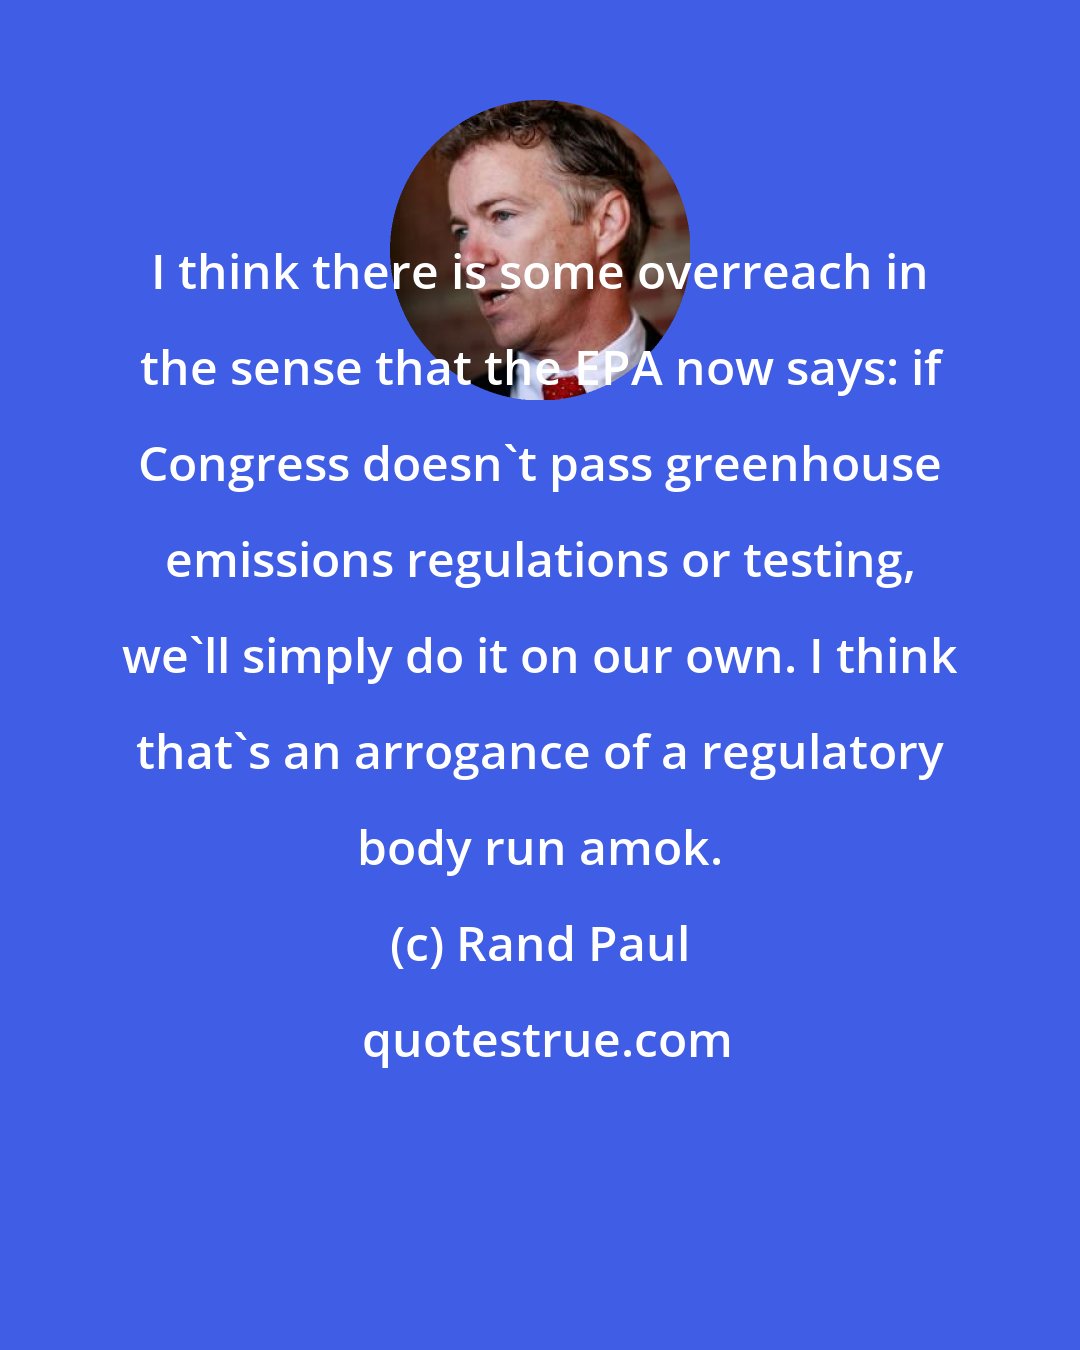 Rand Paul: I think there is some overreach in the sense that the EPA now says: if Congress doesn't pass greenhouse emissions regulations or testing, we'll simply do it on our own. I think that's an arrogance of a regulatory body run amok.